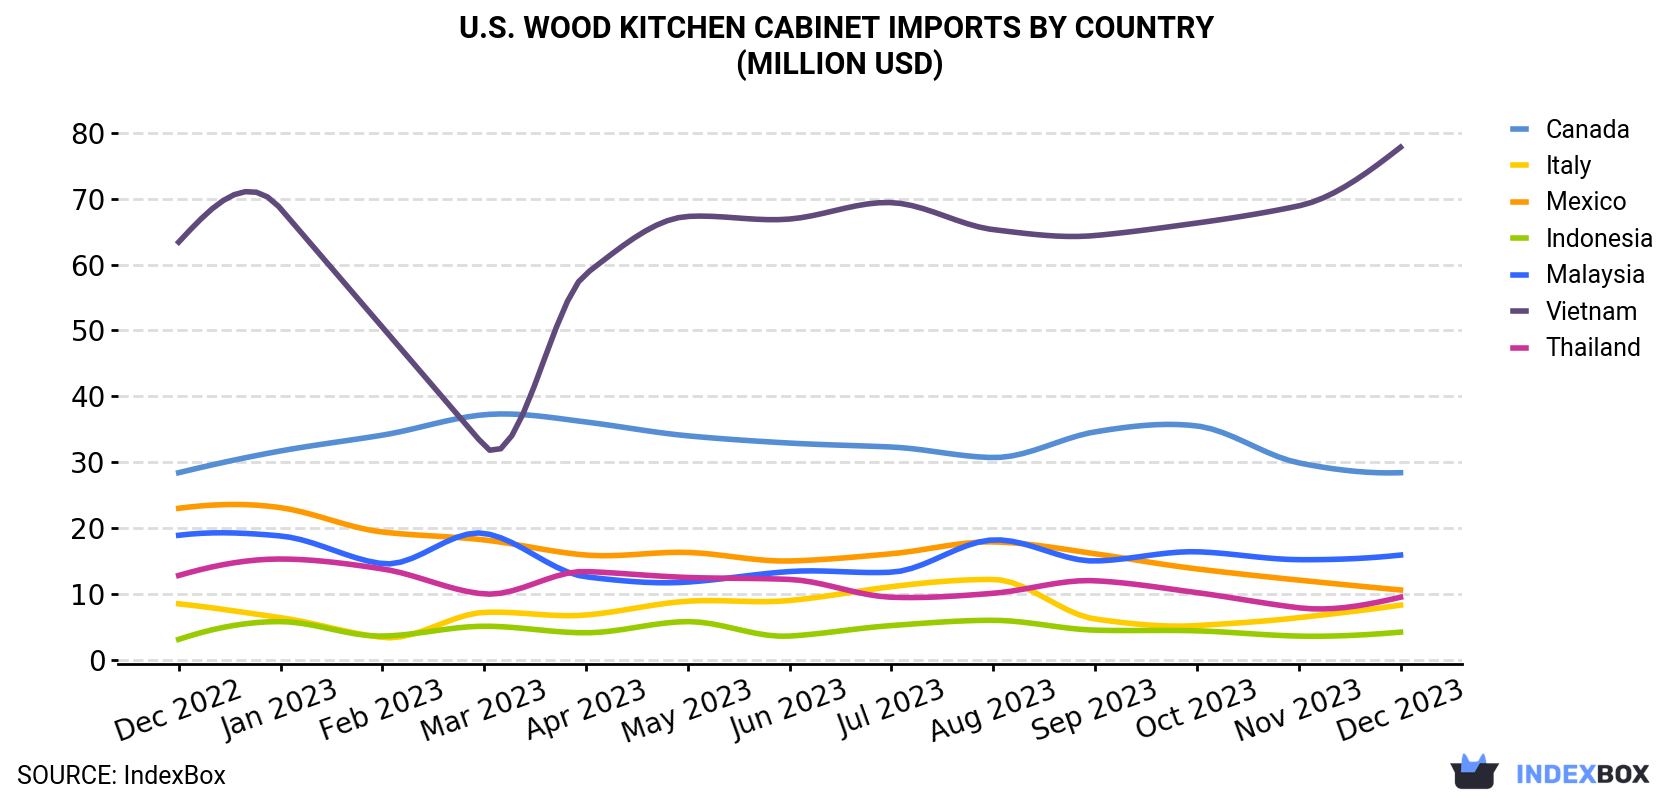 U.S. Wood Kitchen Cabinet Imports By Country (Million USD)